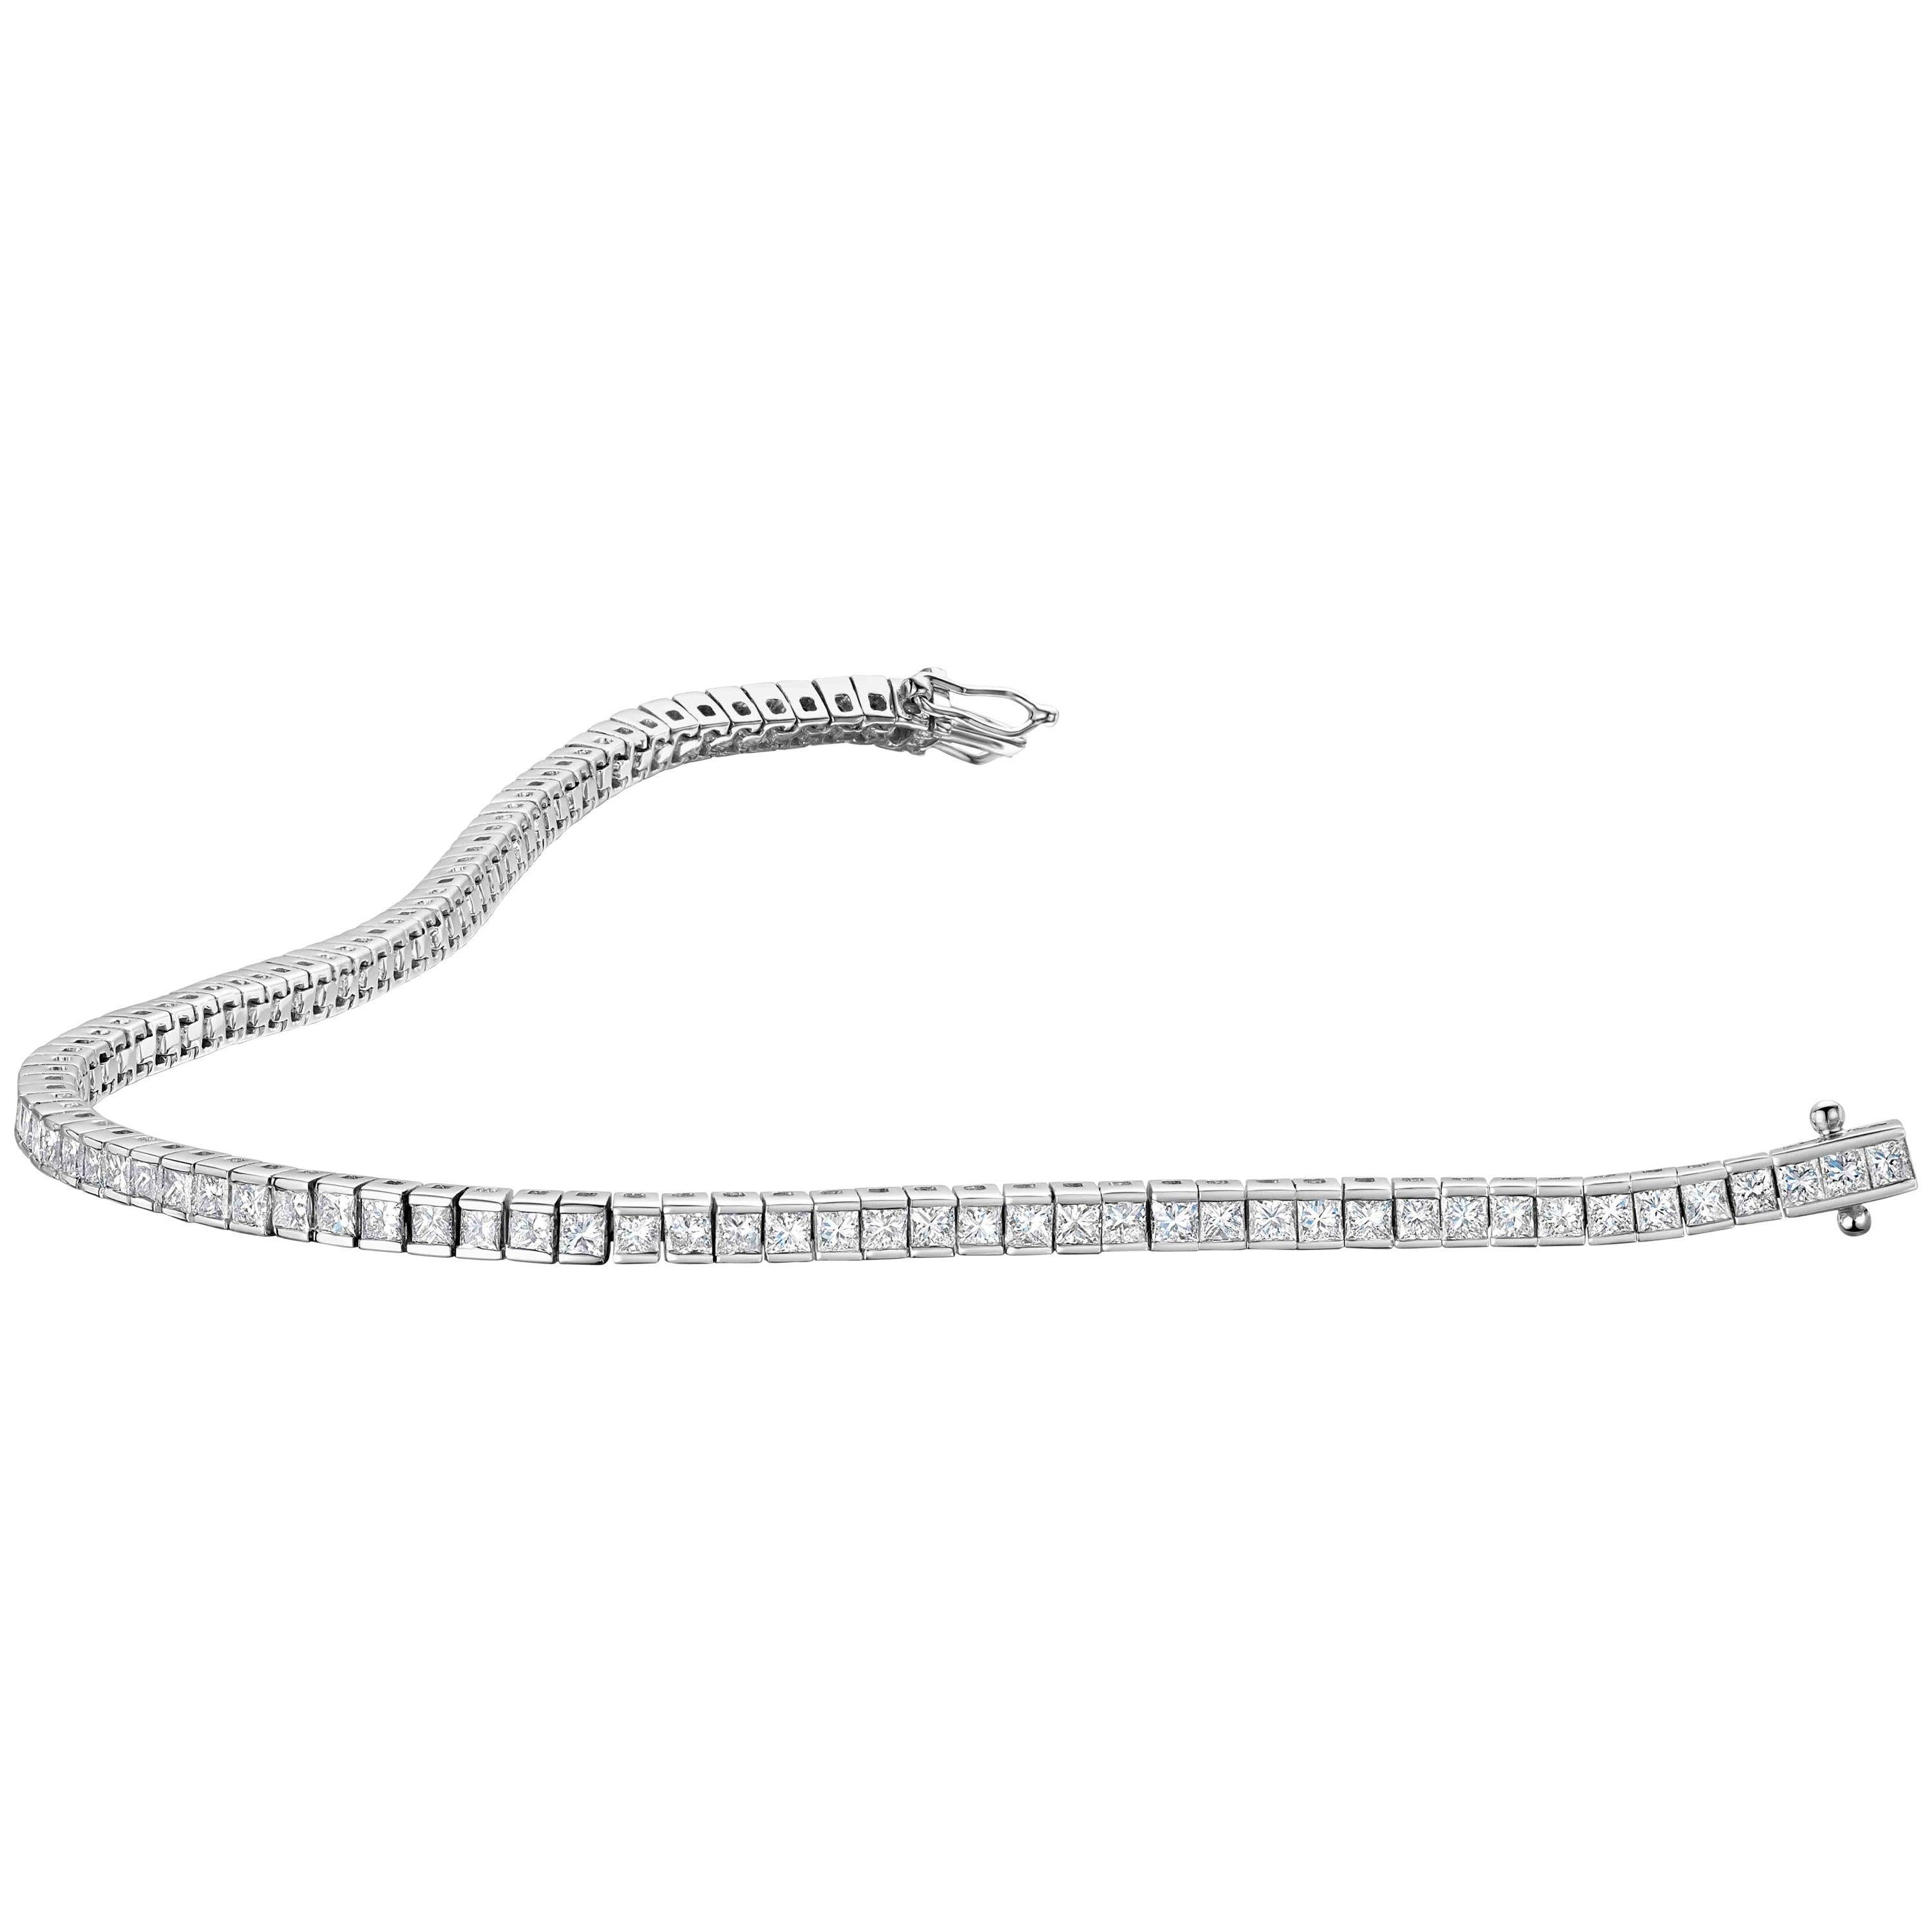 Available in white gold, yellow gold or platinum, this tennis bracelet features over 3 carats of square cut diamonds.